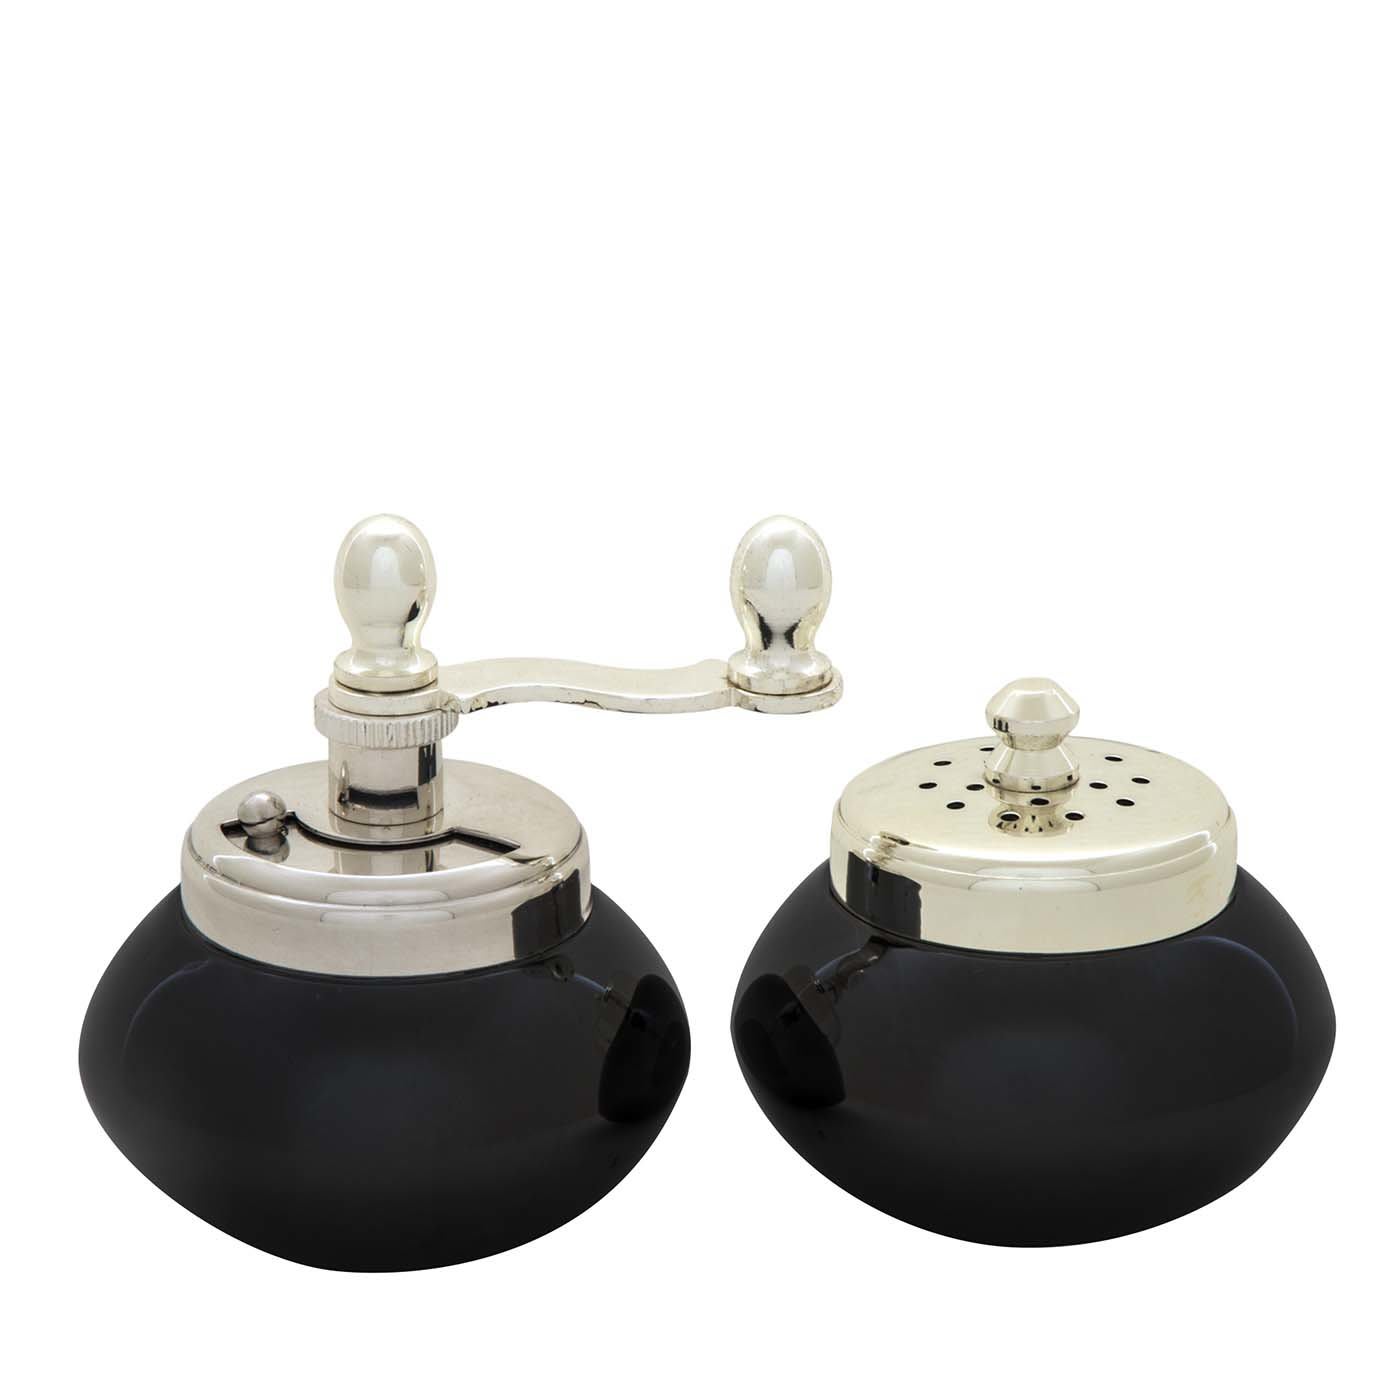 Black Nickel And Silver Plated Brass Pepper Mill And Salt Shaker - Chiarugi 1952